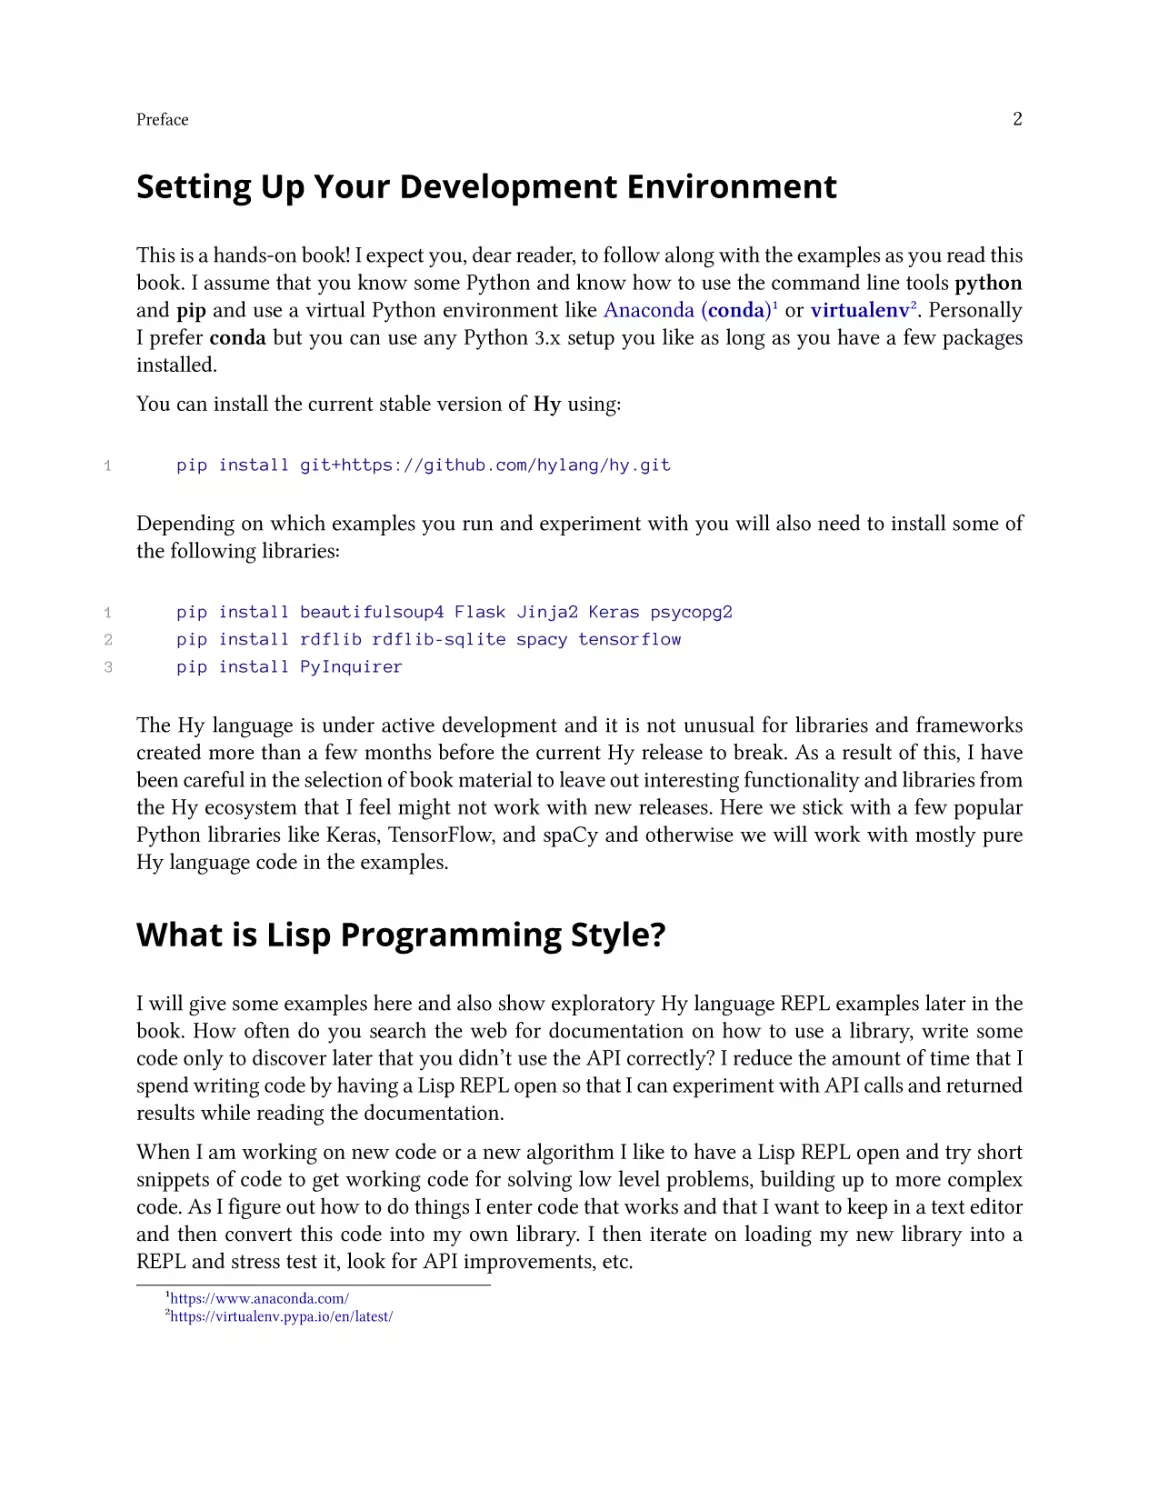 Setting Up Your Development Environment
What is Lisp Programming Style?